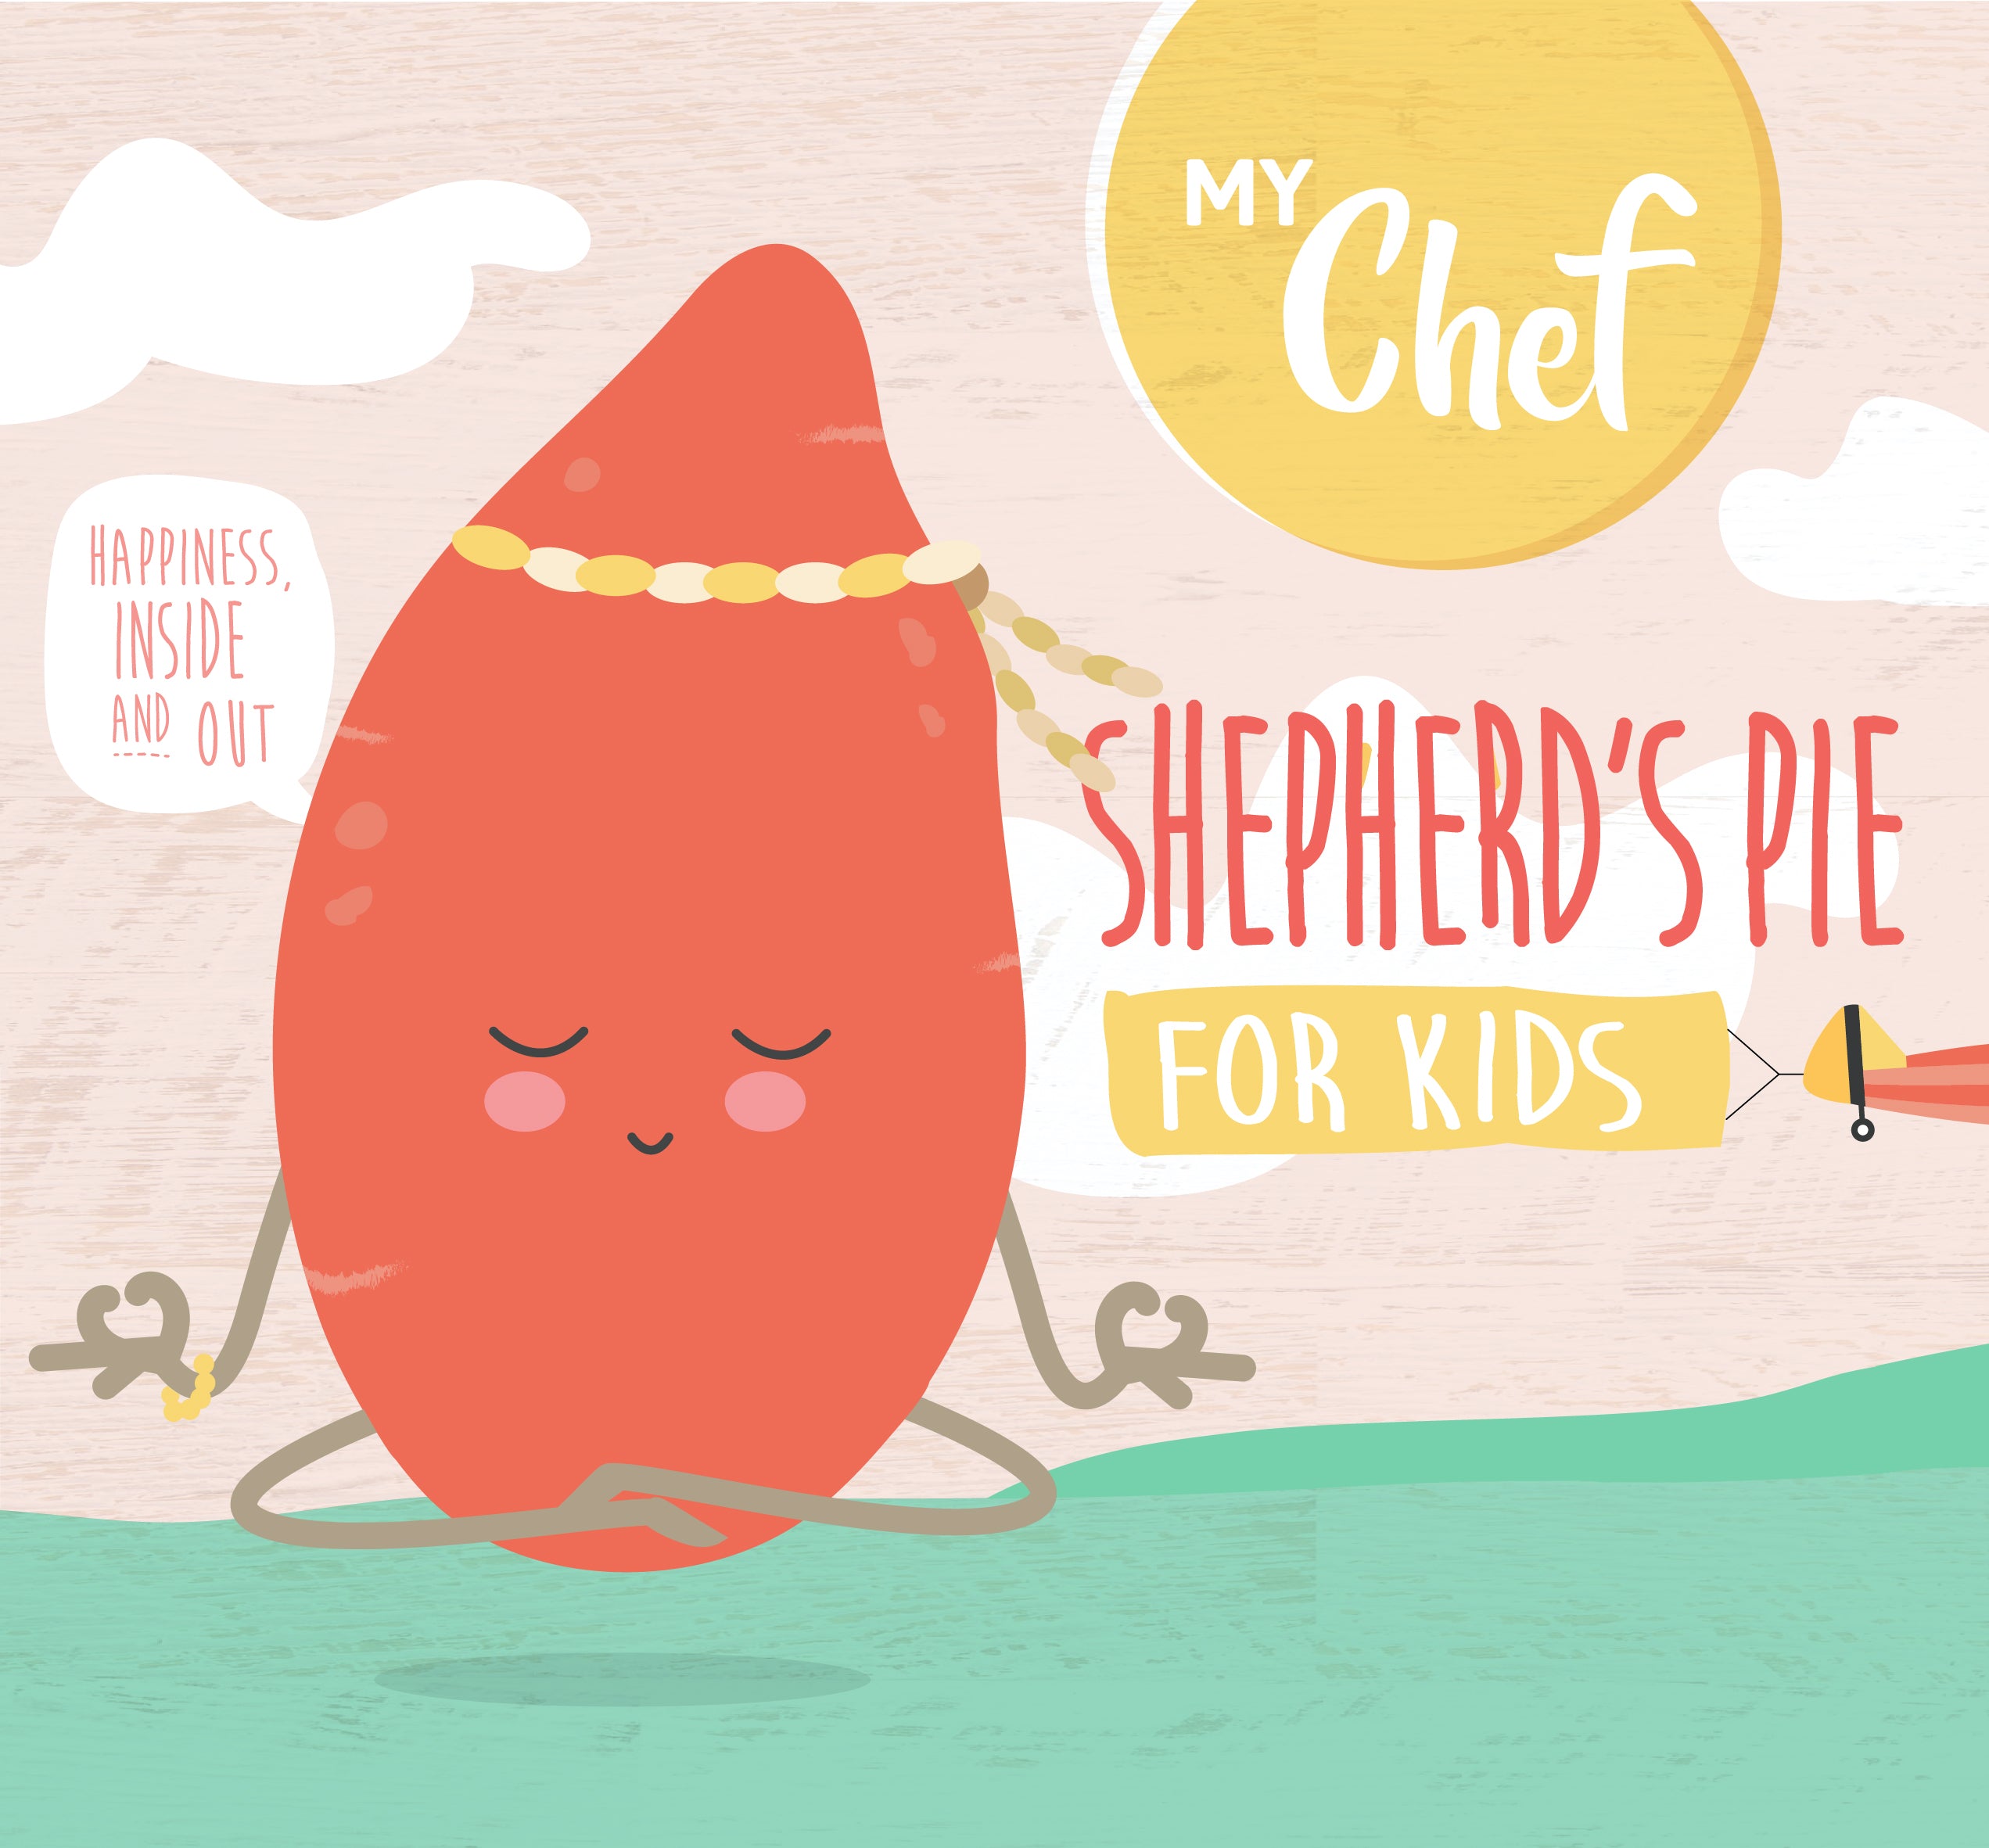 Nourish your little ones with our Kids Shepherd’s Pie, a cozy dish packed with meat, veggies, and a nutritious sweet potato topping